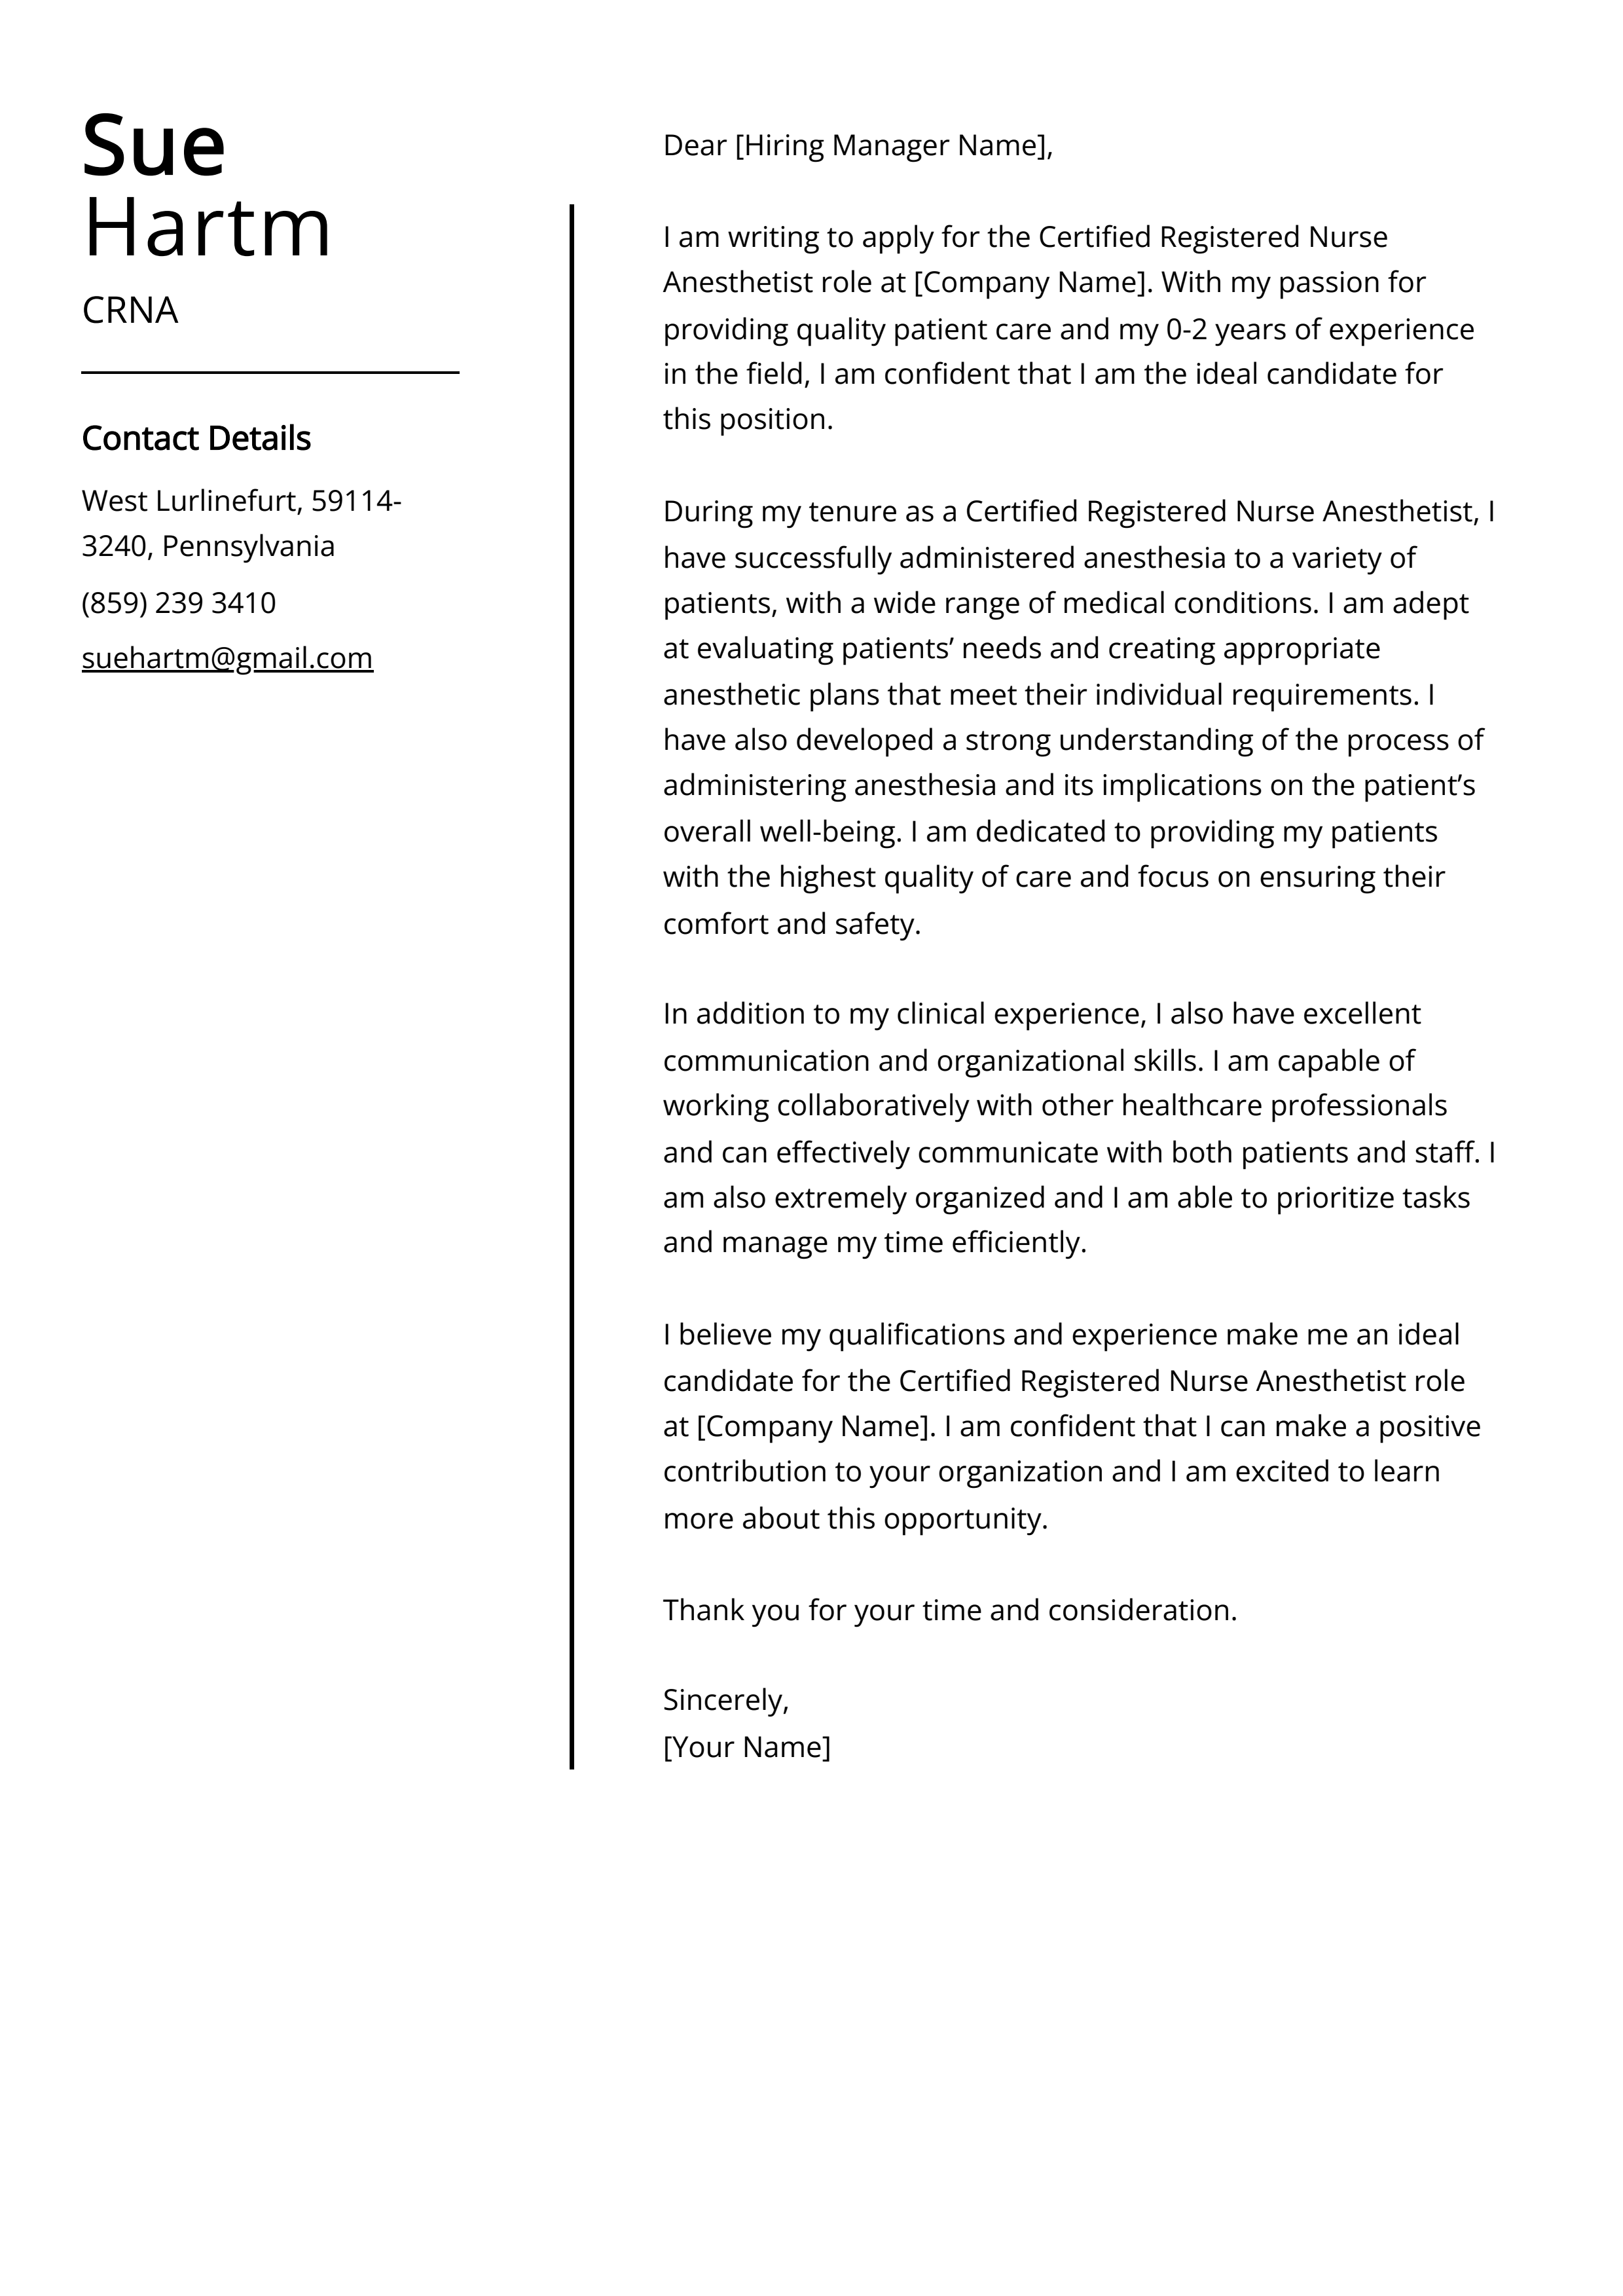 CRNA Cover Letter Example